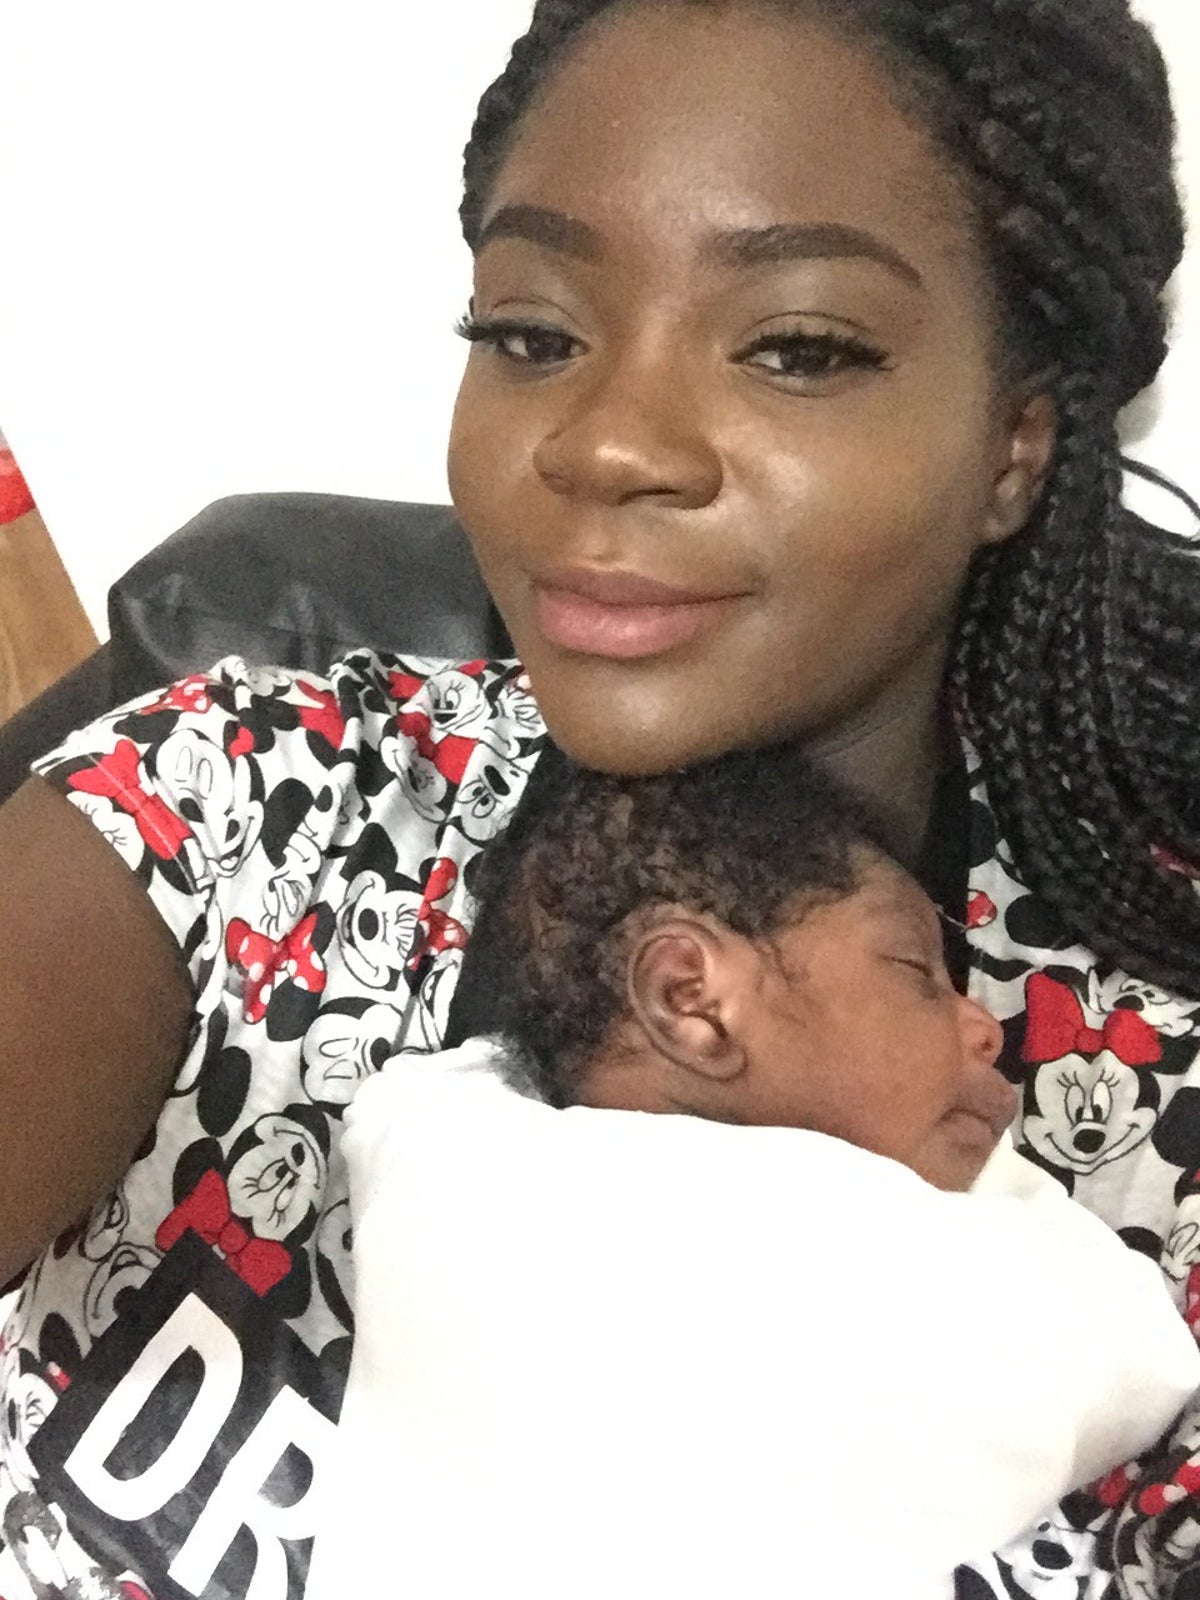 ‘They didn’t believe I was in labour’ says Black mother ‘ignored’ by midwives